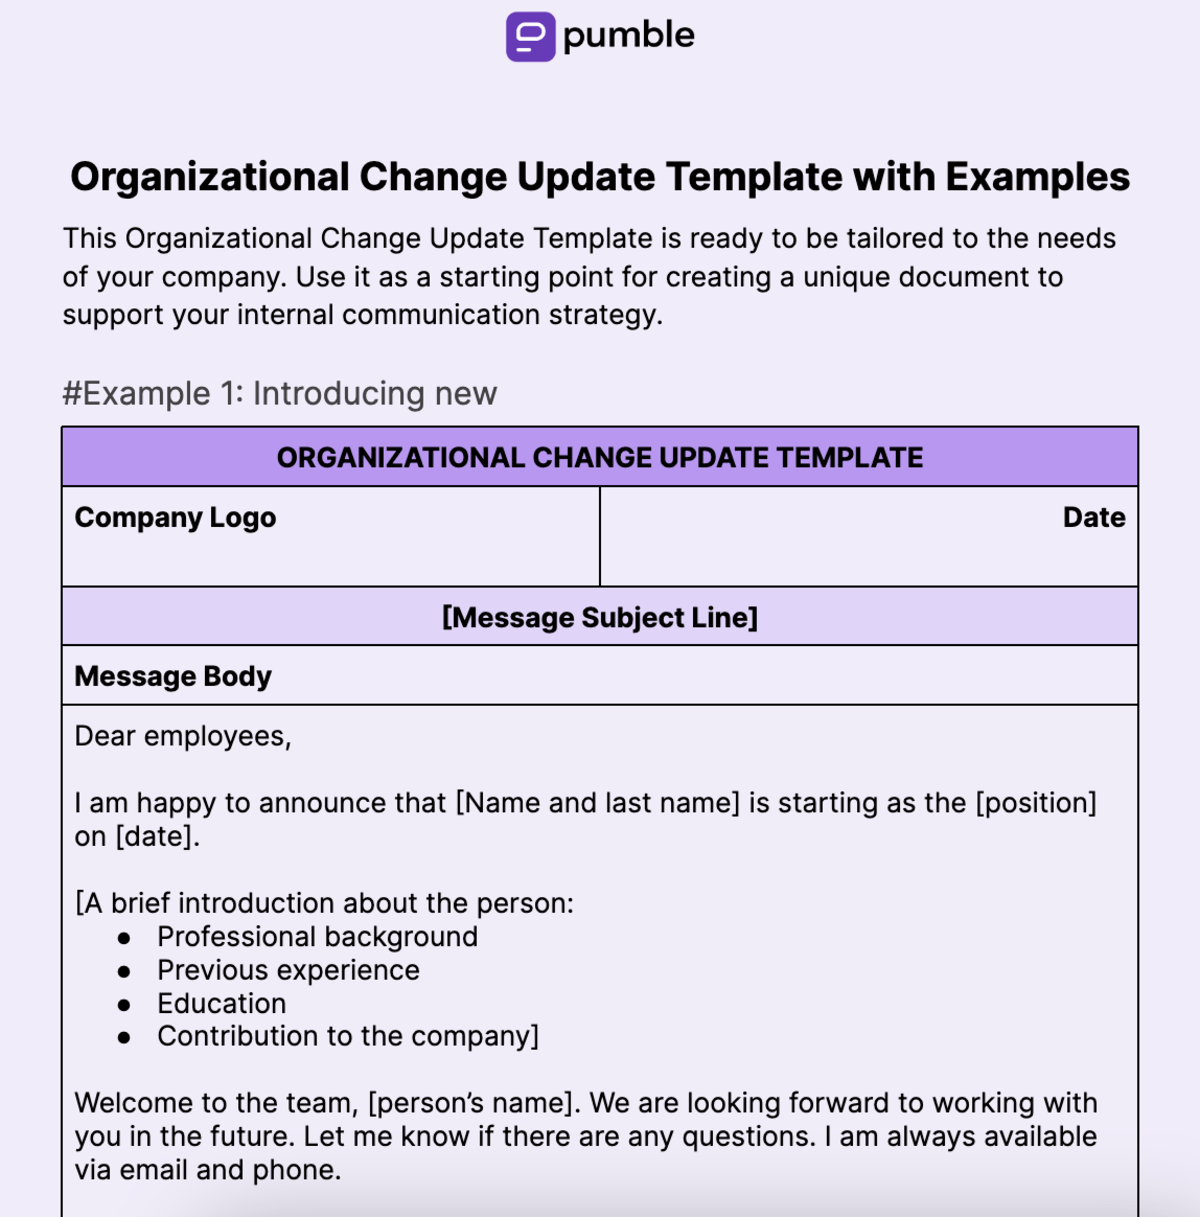 Organizational Change Update Template with Examples